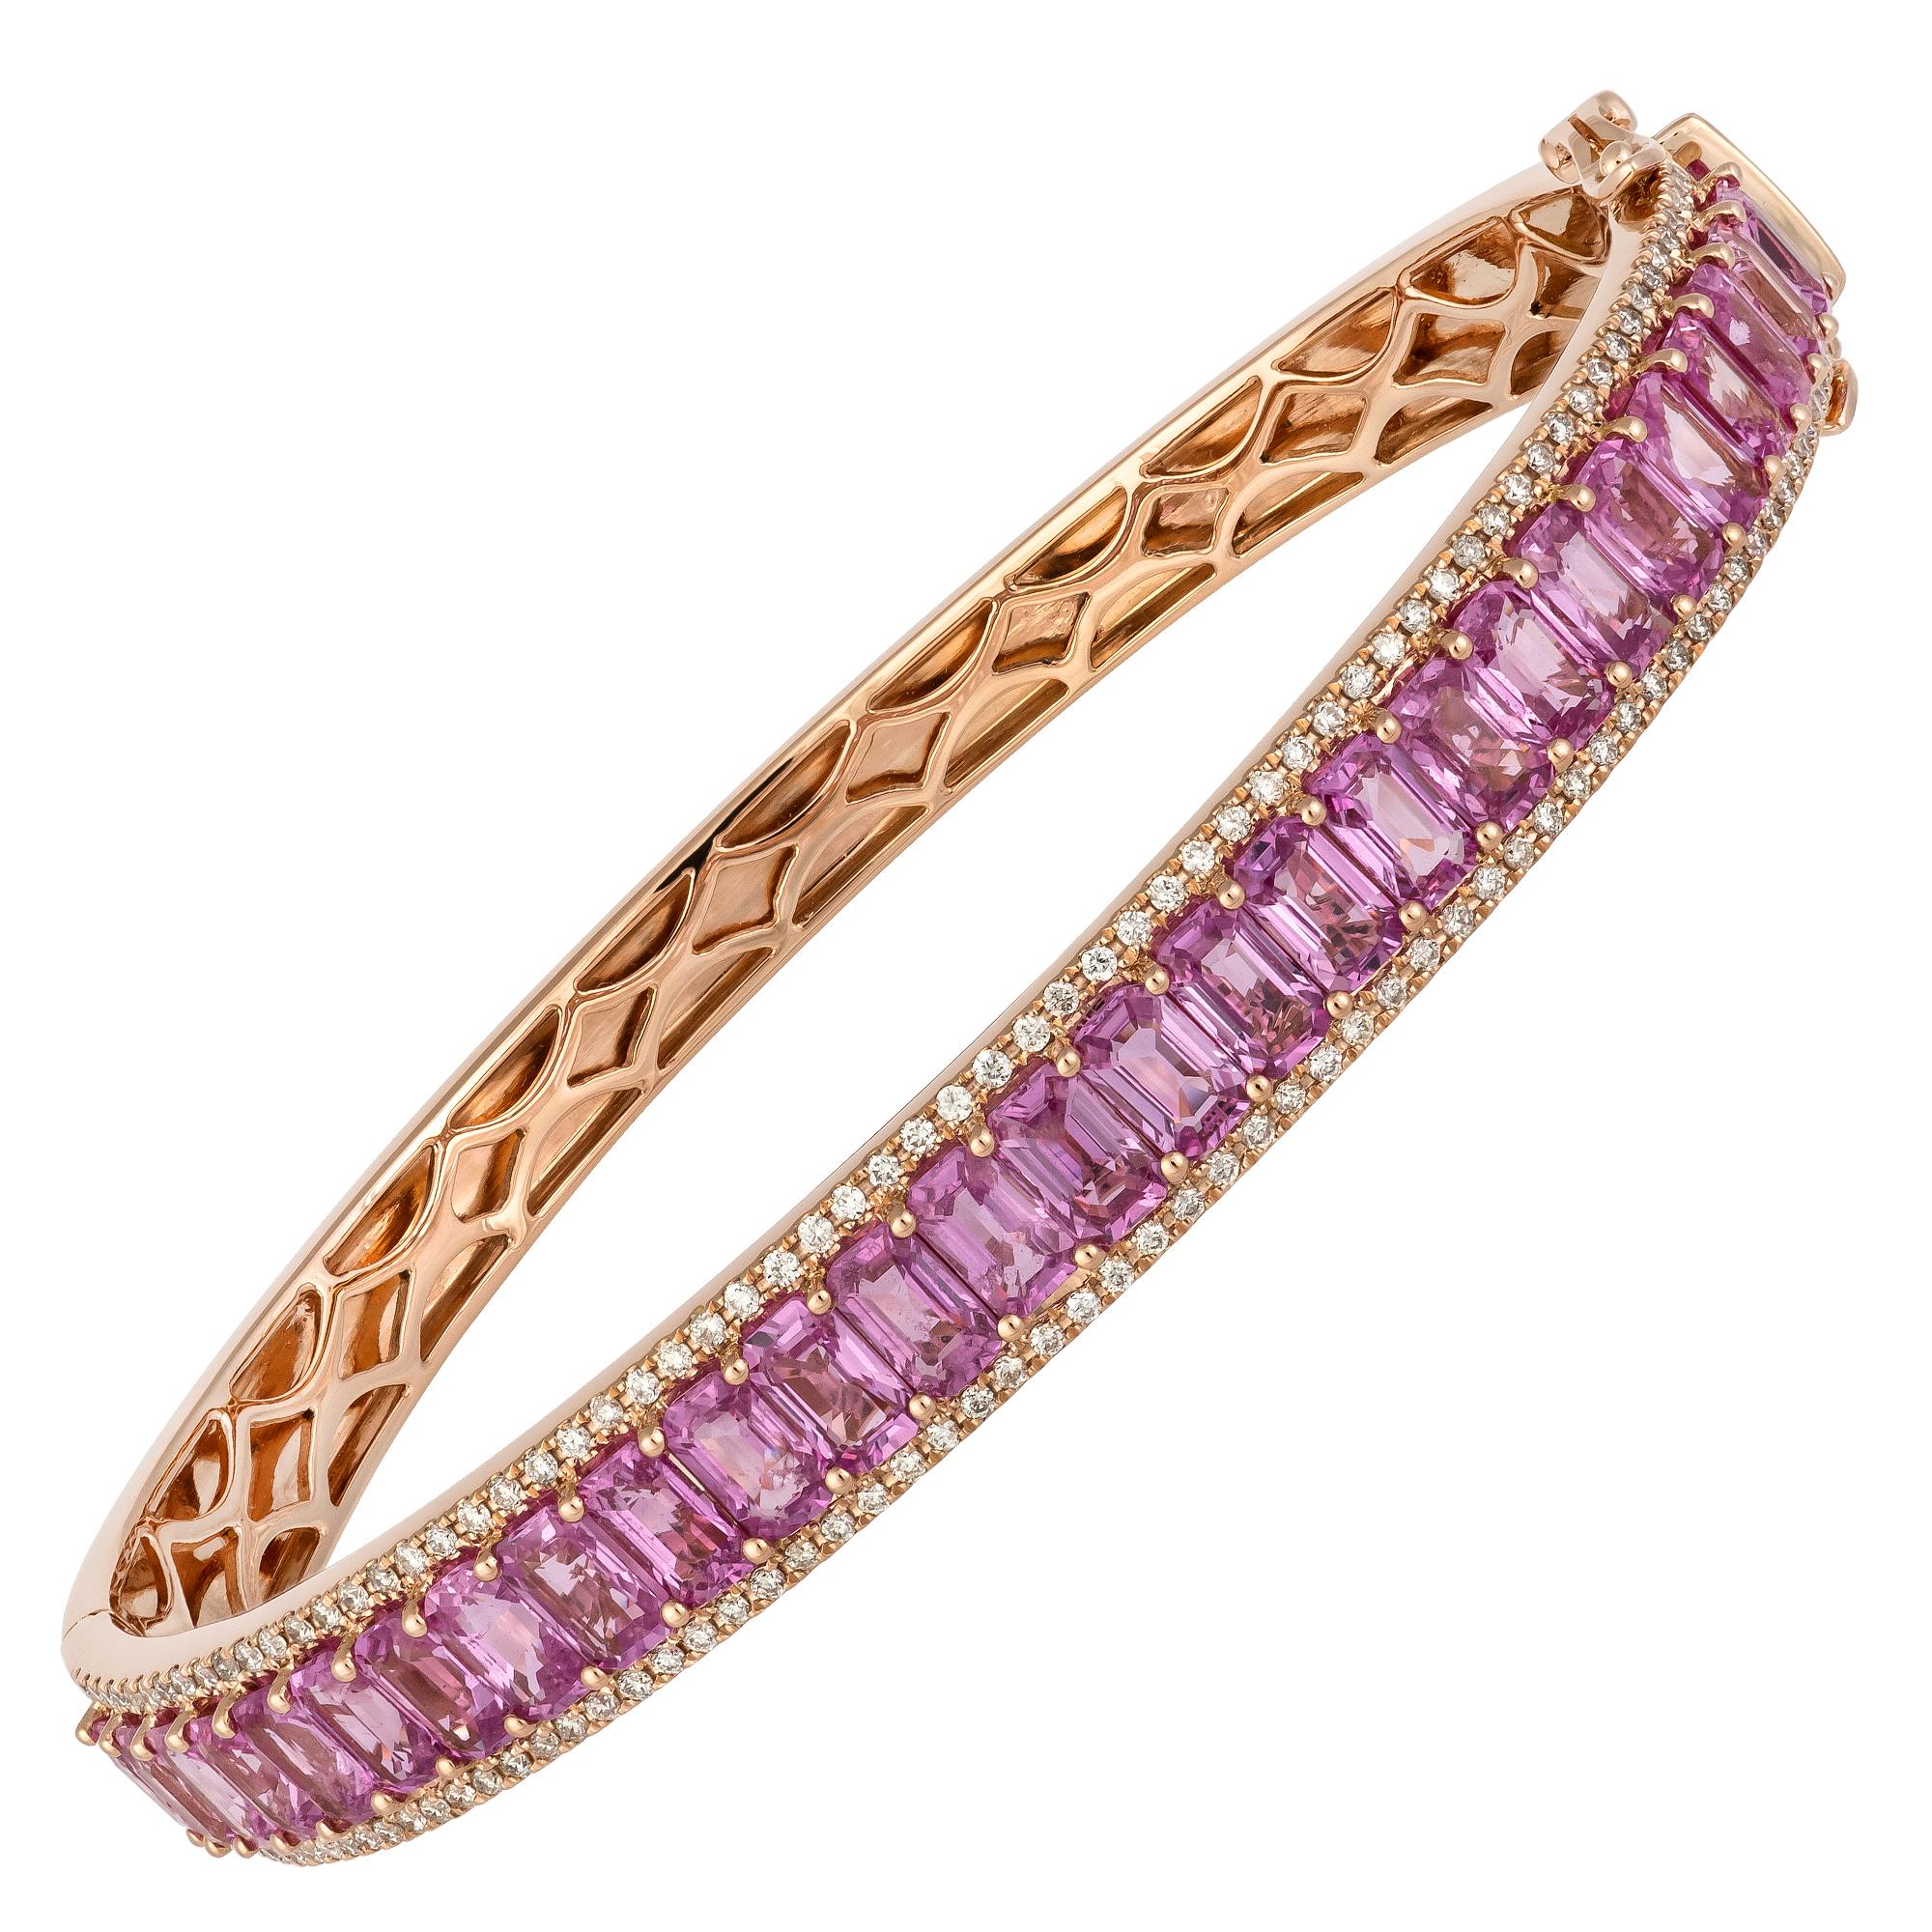 Diamond Tennis Bangle Bracelet 18k Rose Gold Diamond 0.77 Cts/130 Pcs Ps 8.88 In New Condition For Sale In Montreux, CH